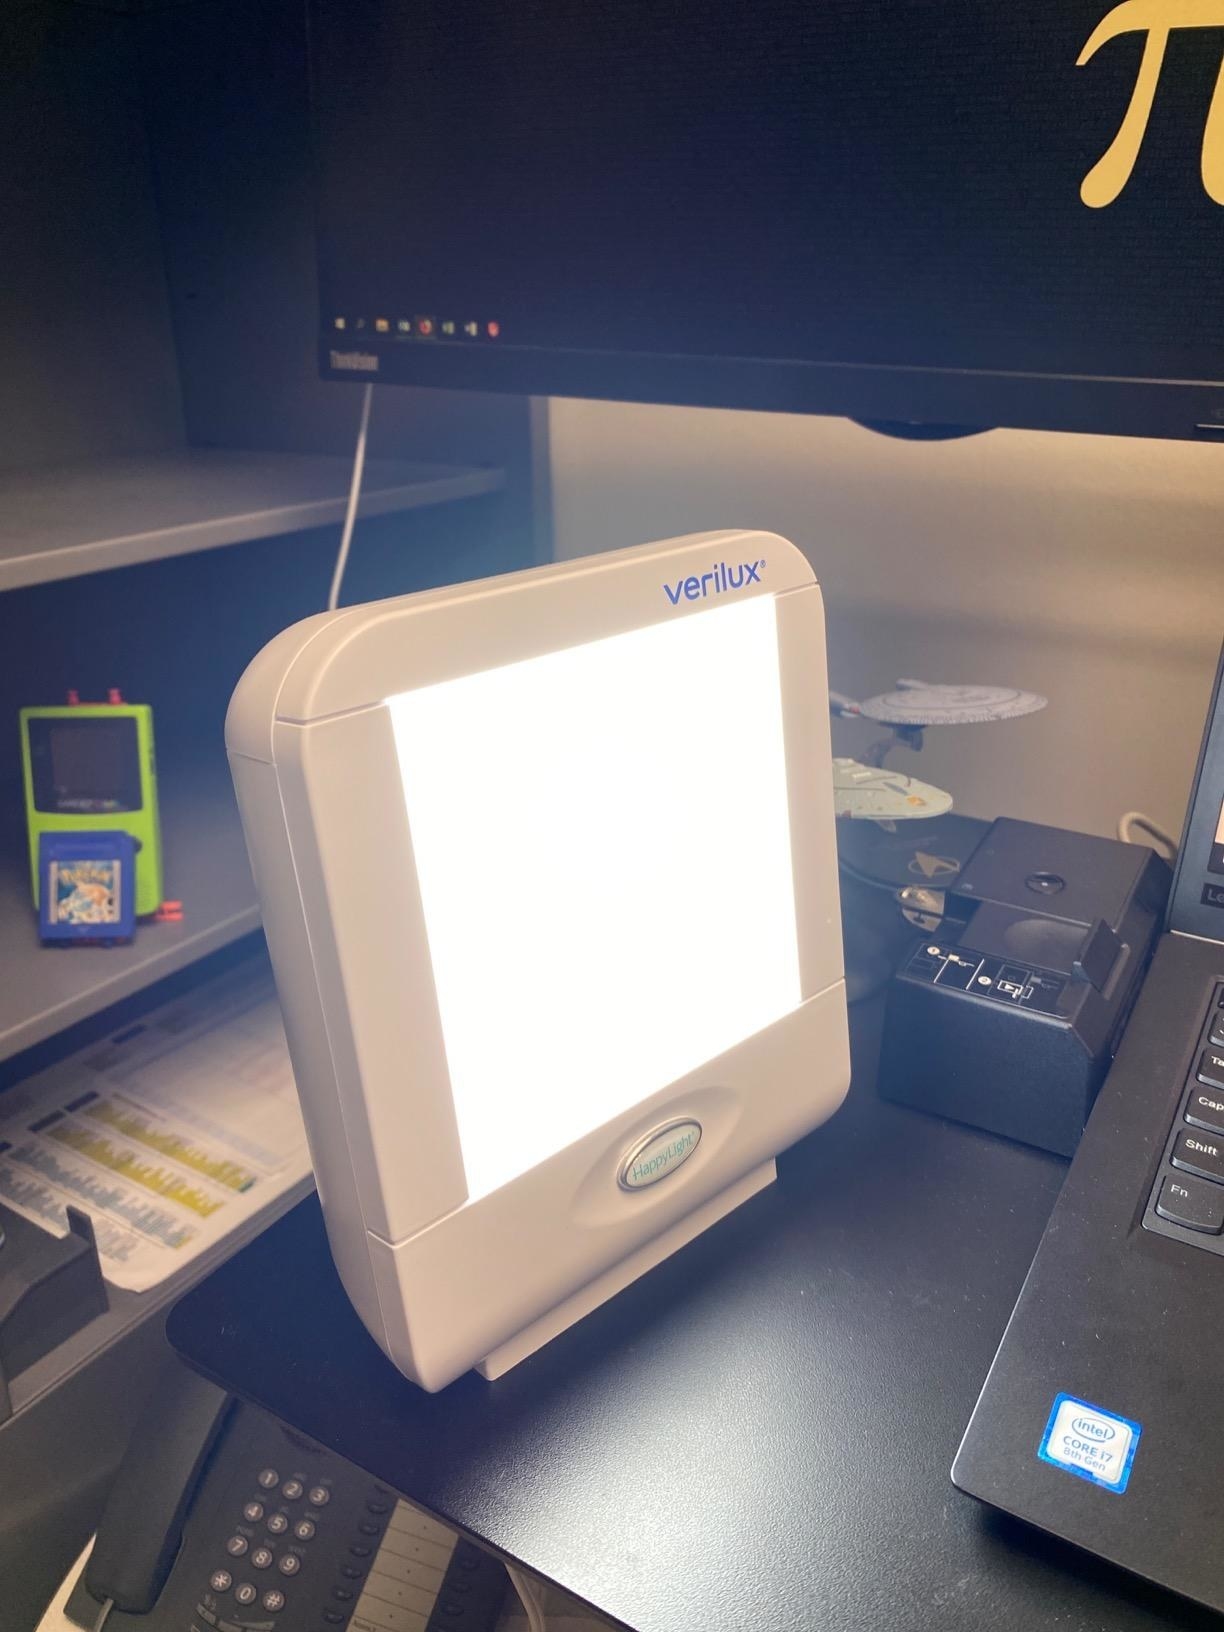 review photo of someones therapy lamp turned on next to their computer